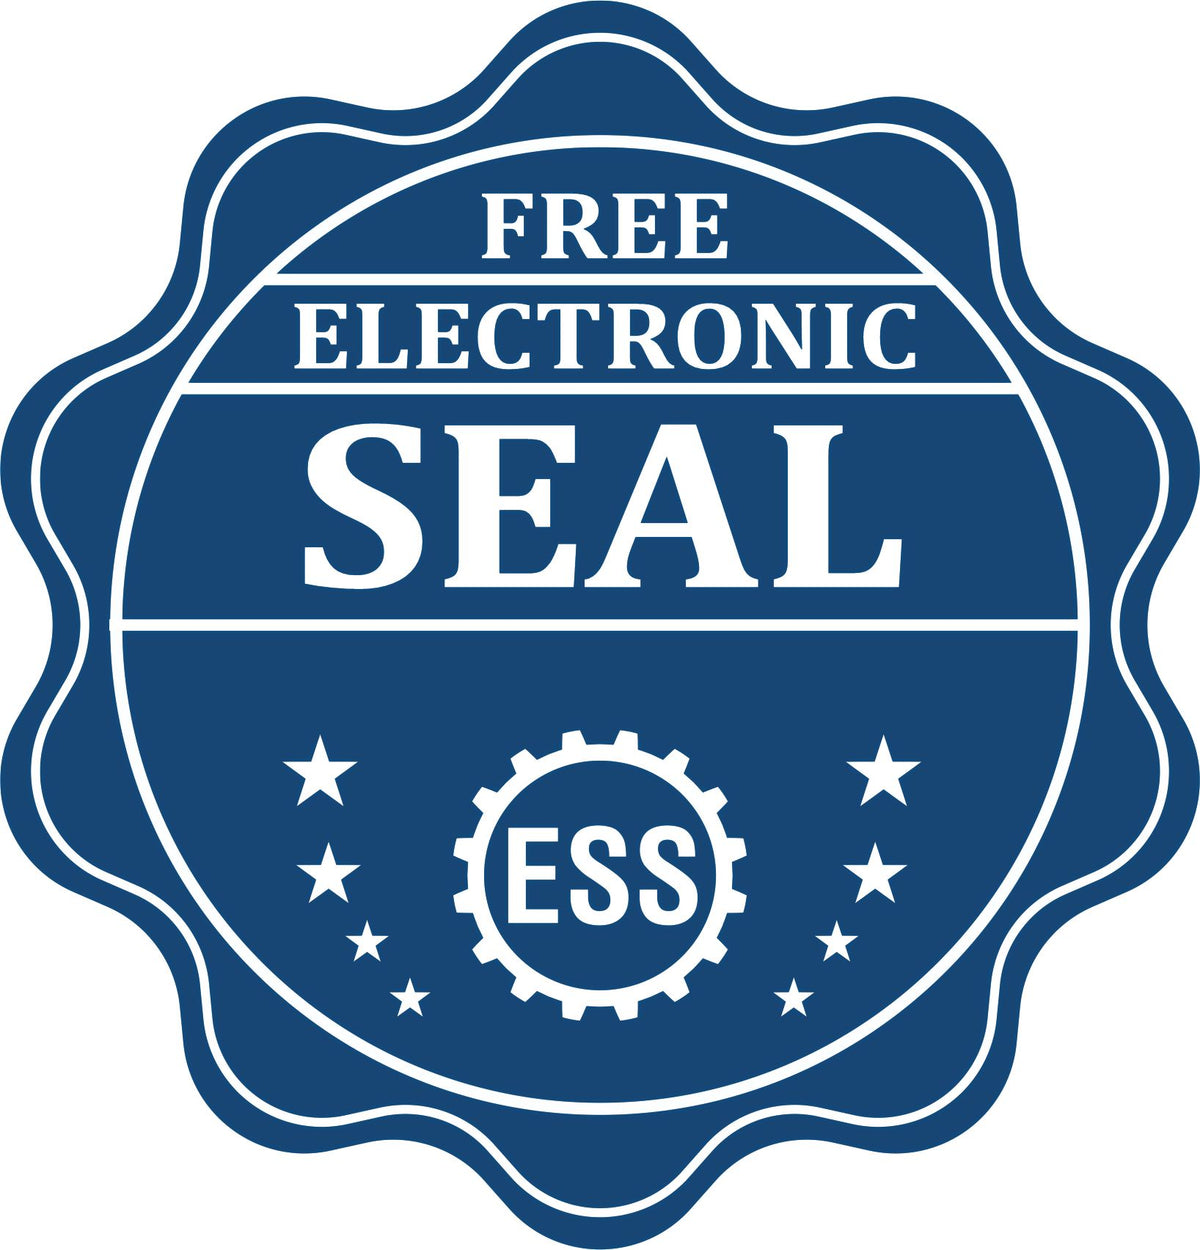 A badge showing a free electronic seal for the State of Montana Soft Land Surveyor Embossing Seal with stars and the ESS gear on the emblem.